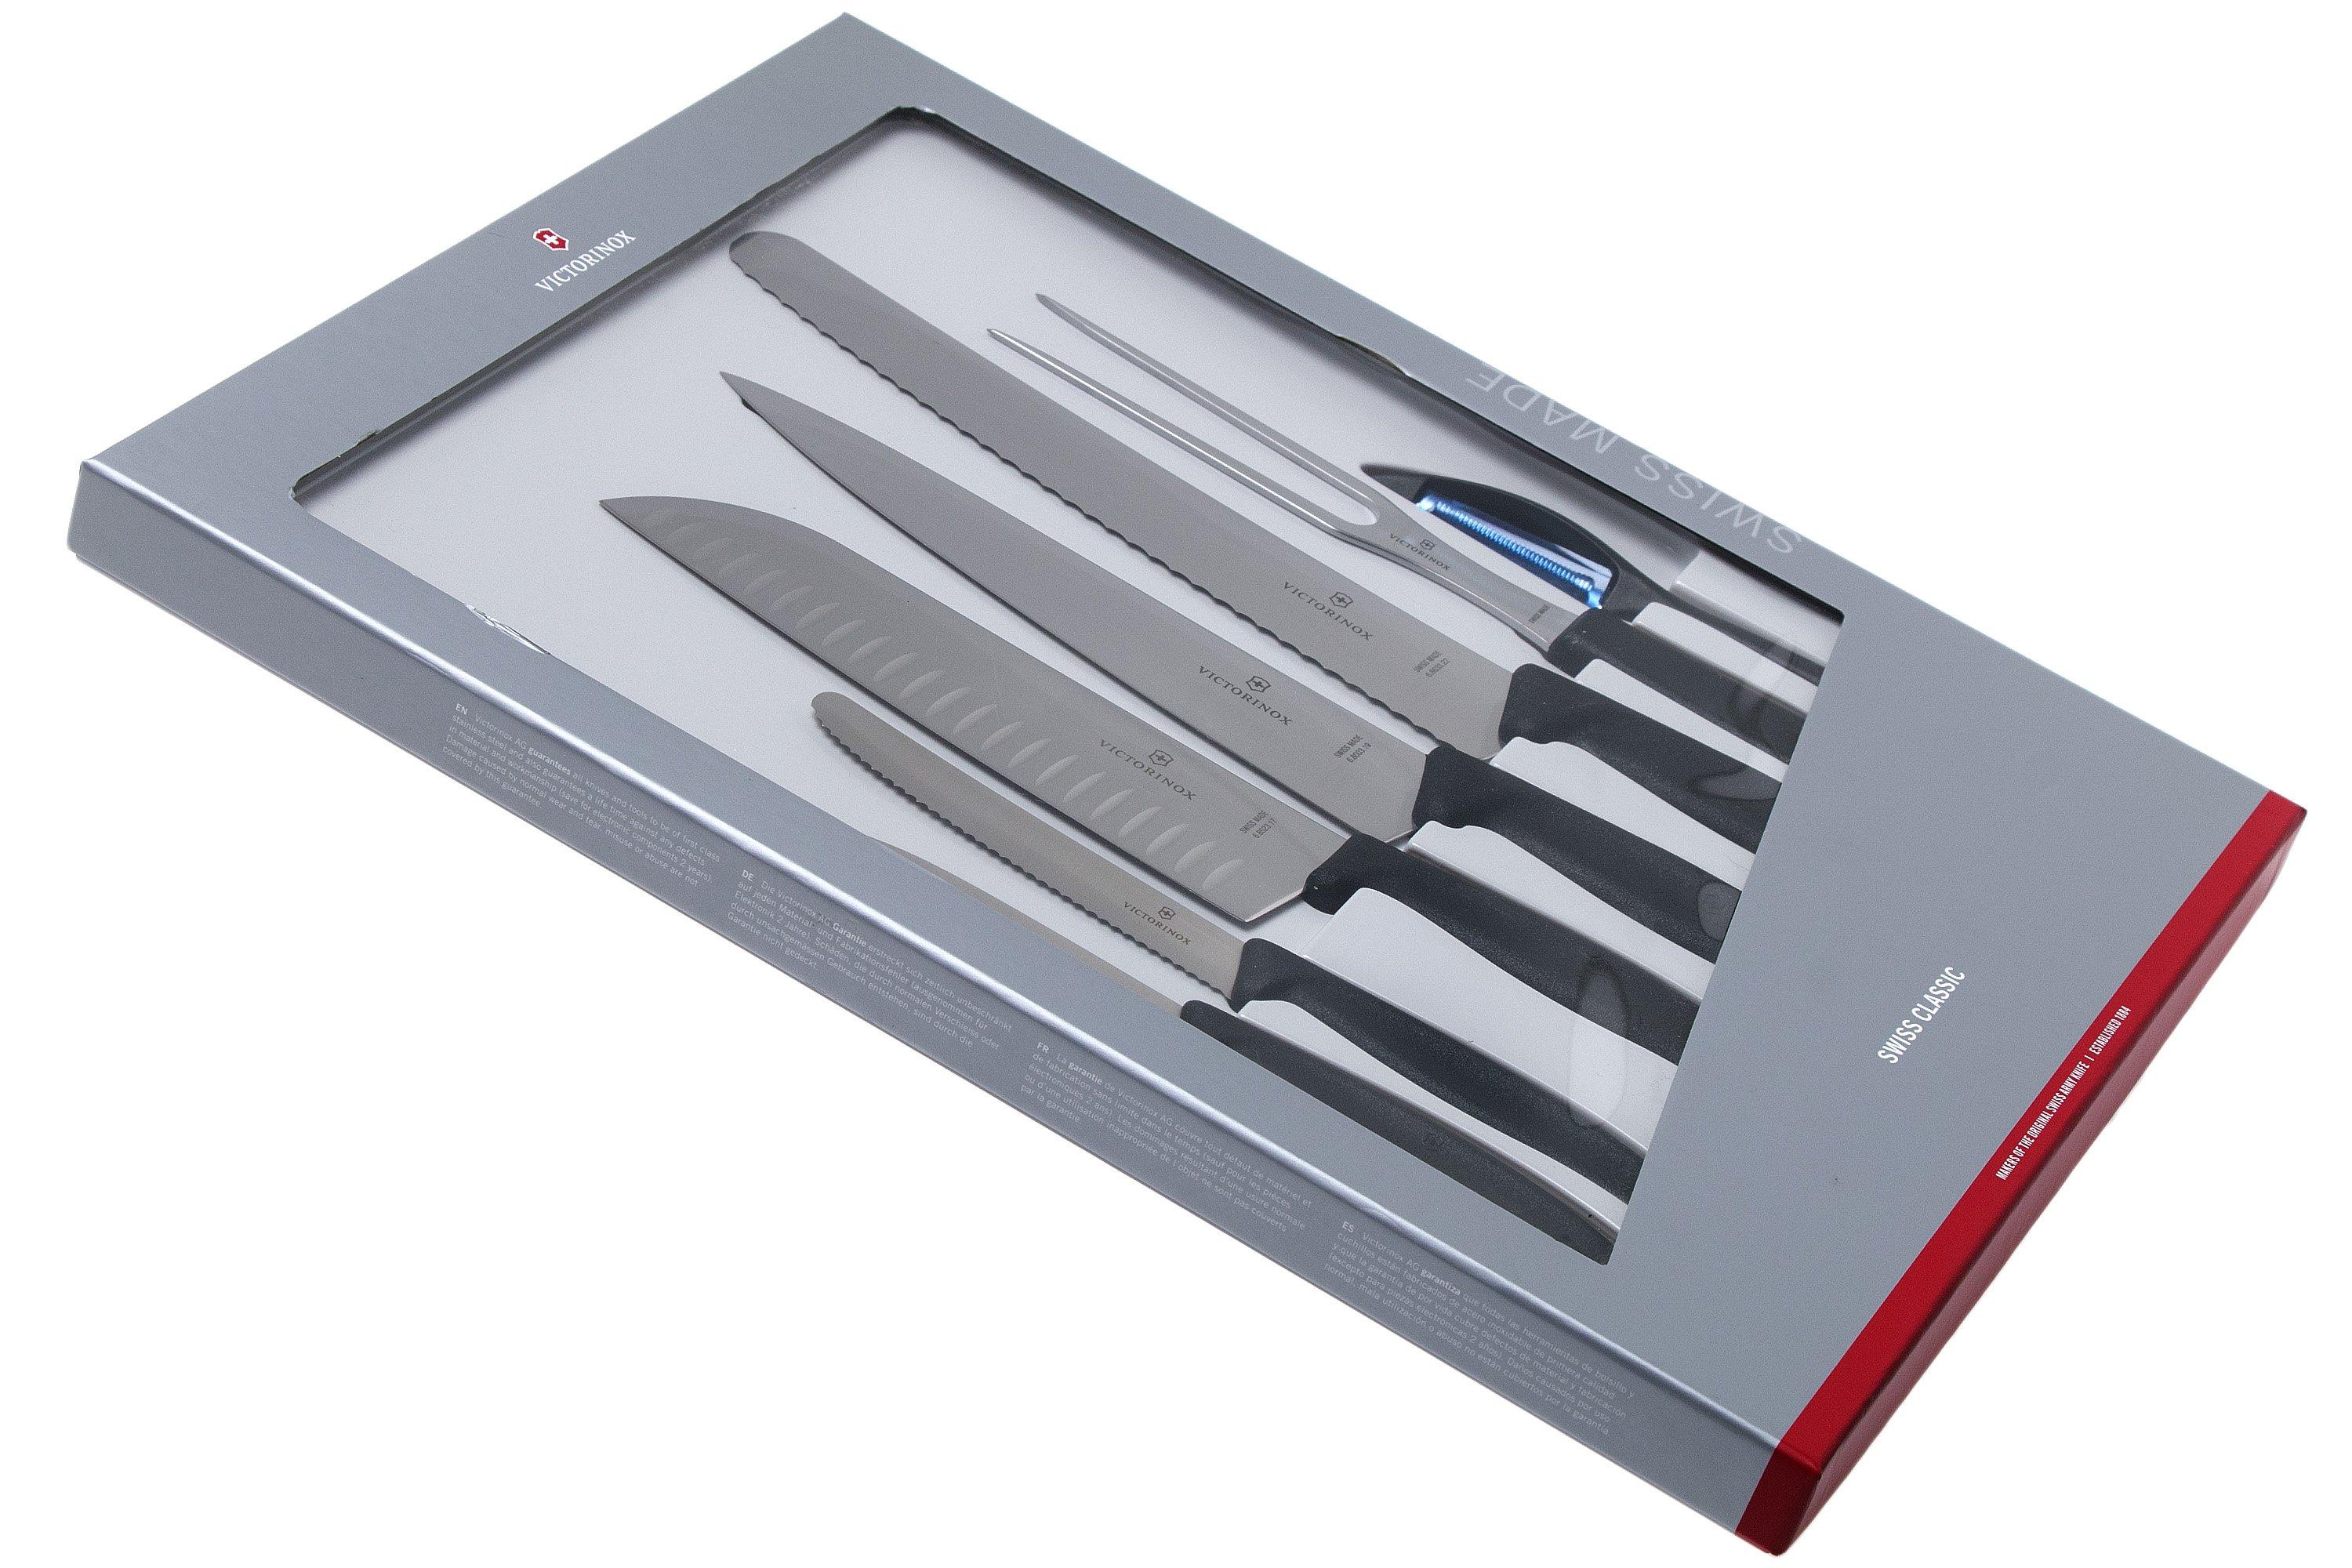  Victorinox Swiss Classic Kitchen Knife Set, 5 Pieces - Paring  Knives, Utility Knife, Carving Knife and Bread Knife - Black, Multiple:  Home & Kitchen